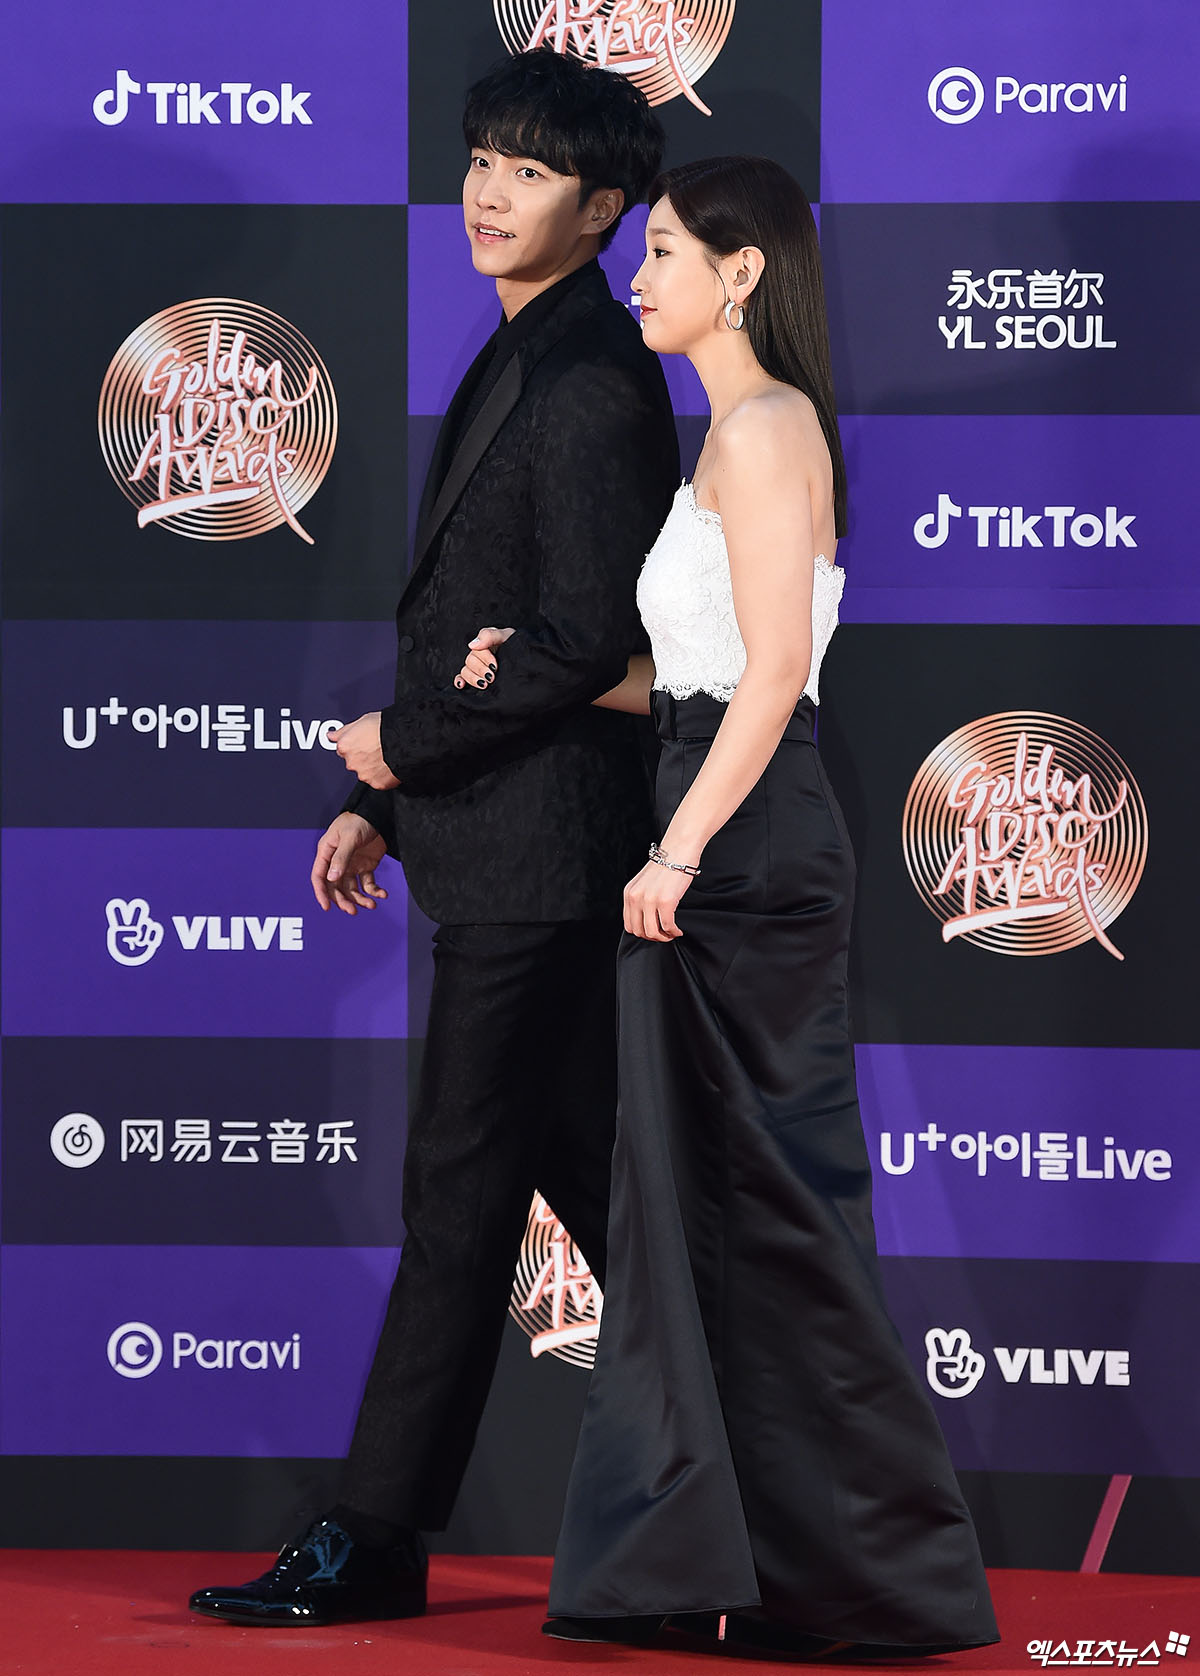 Actor Lee Seung-gi and Park So-dam, who attended the red carpet event ahead of the awards ceremony of the 34th Golden Disk Awards with TikTalk at the Gocheok Sky Dome in Seoul Guro District on the afternoon of the 5th, have photo time.